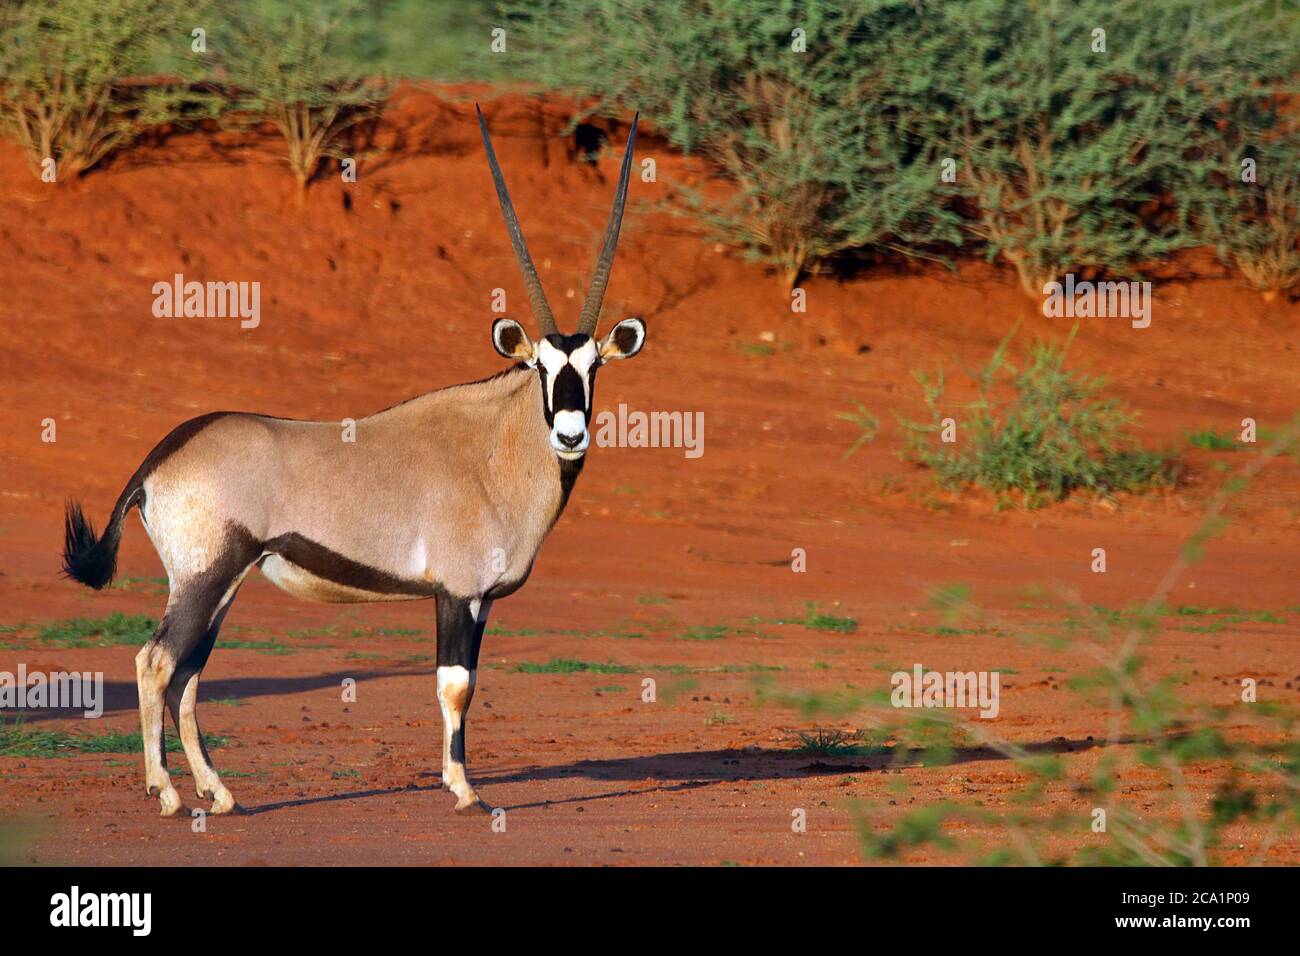 Gemsbok or Oryx (Oryx gazella) standing looking at the camera on red sand during the wet season at the Erindi Private Game Reserve, Namibia. Stock Photo